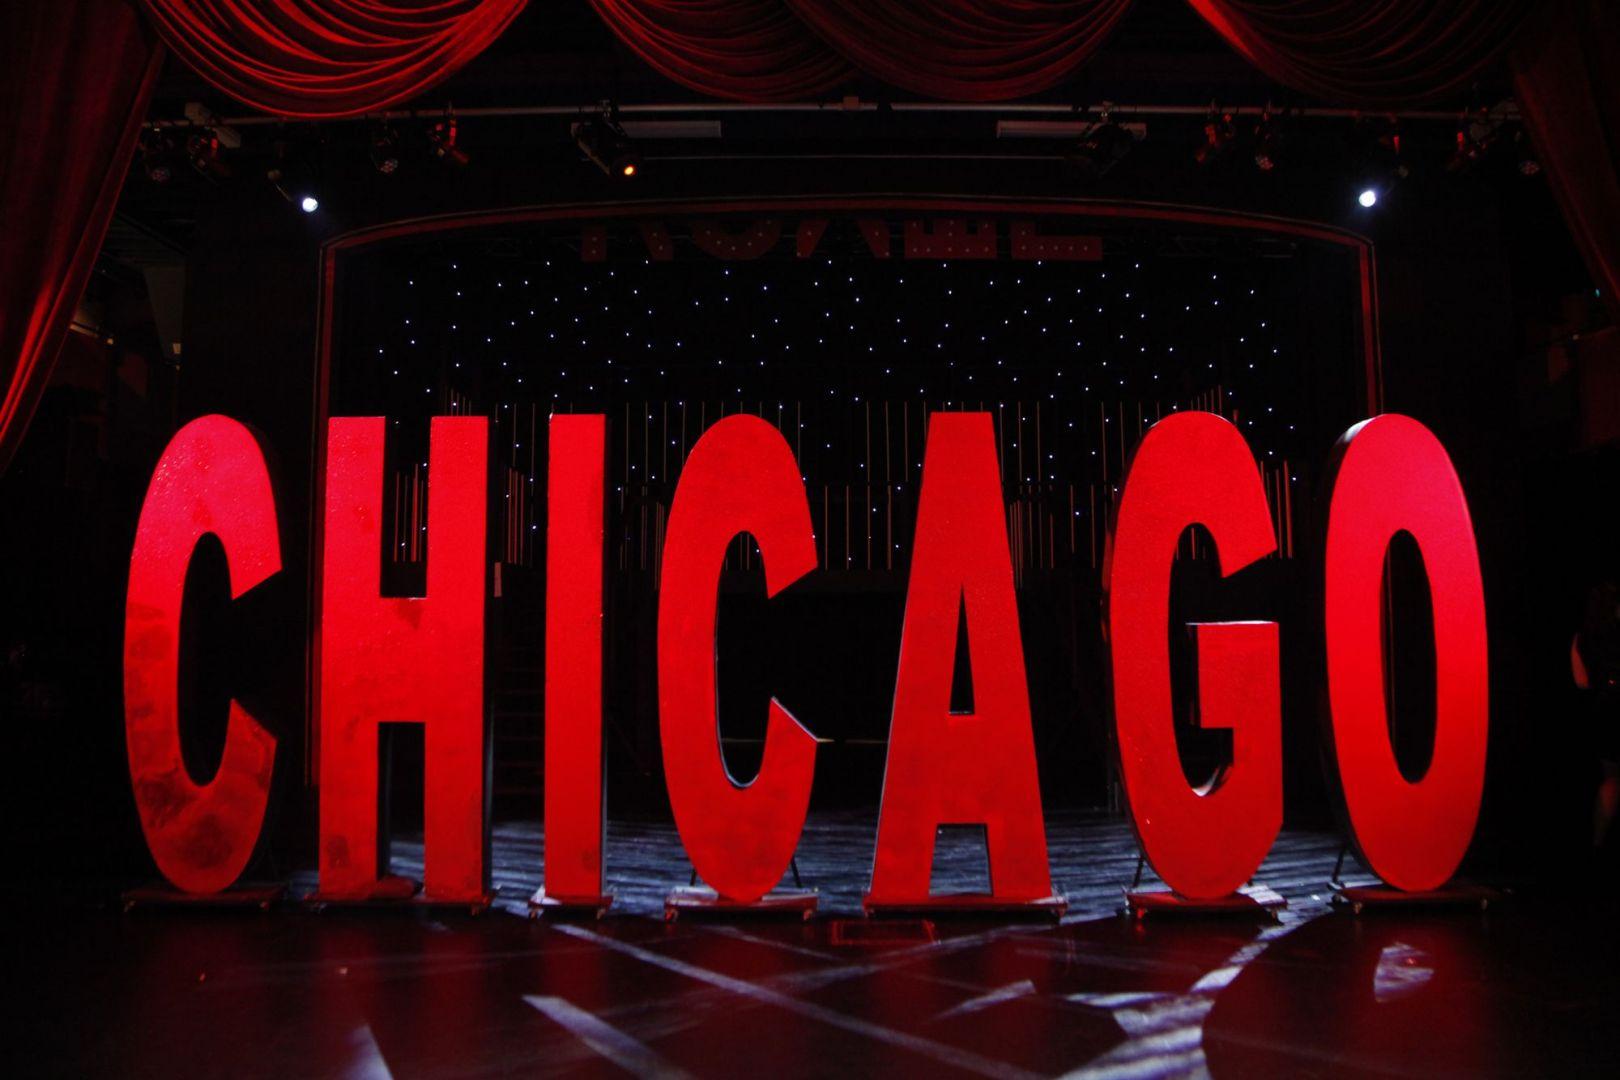 Chicago in big letters